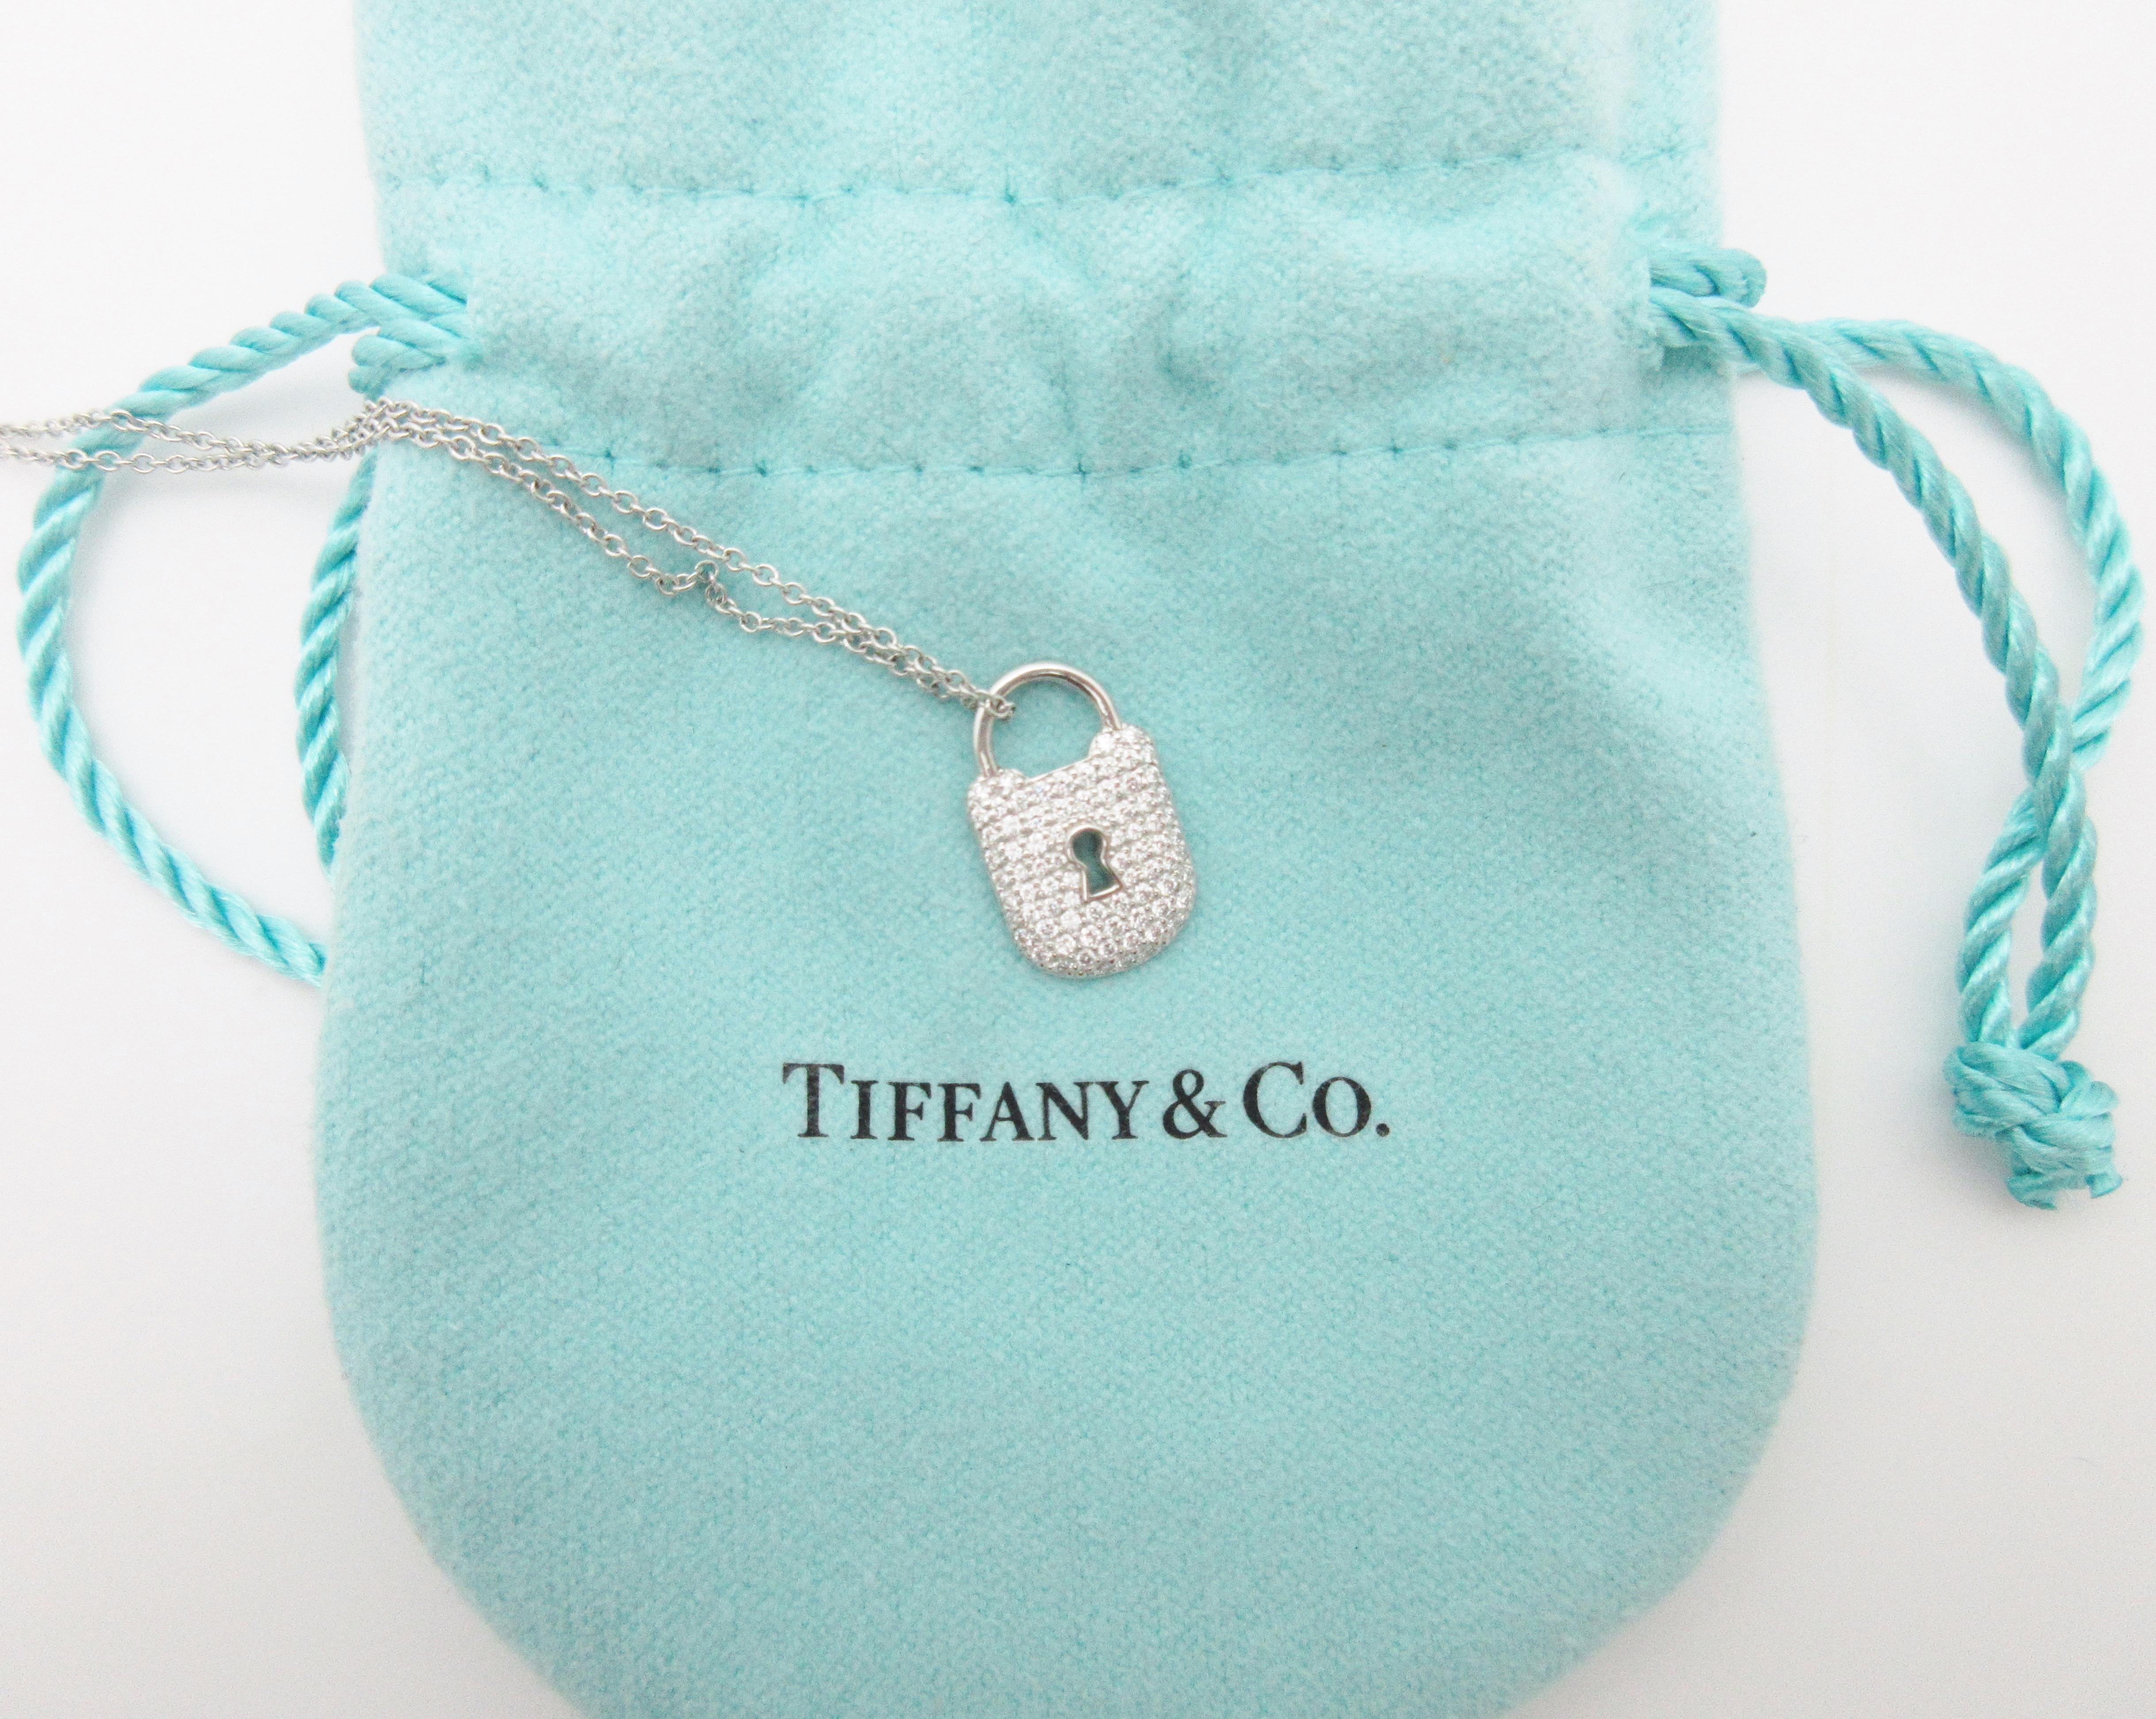 This diamond-studded, platinum padlock necklace from Tiffany & Company is a delicate look with a sparkly punch.

The piece features 67 bright white, round brilliant diamonds totaling approximately .50cttw. set in a platinum padlock. The lock itself